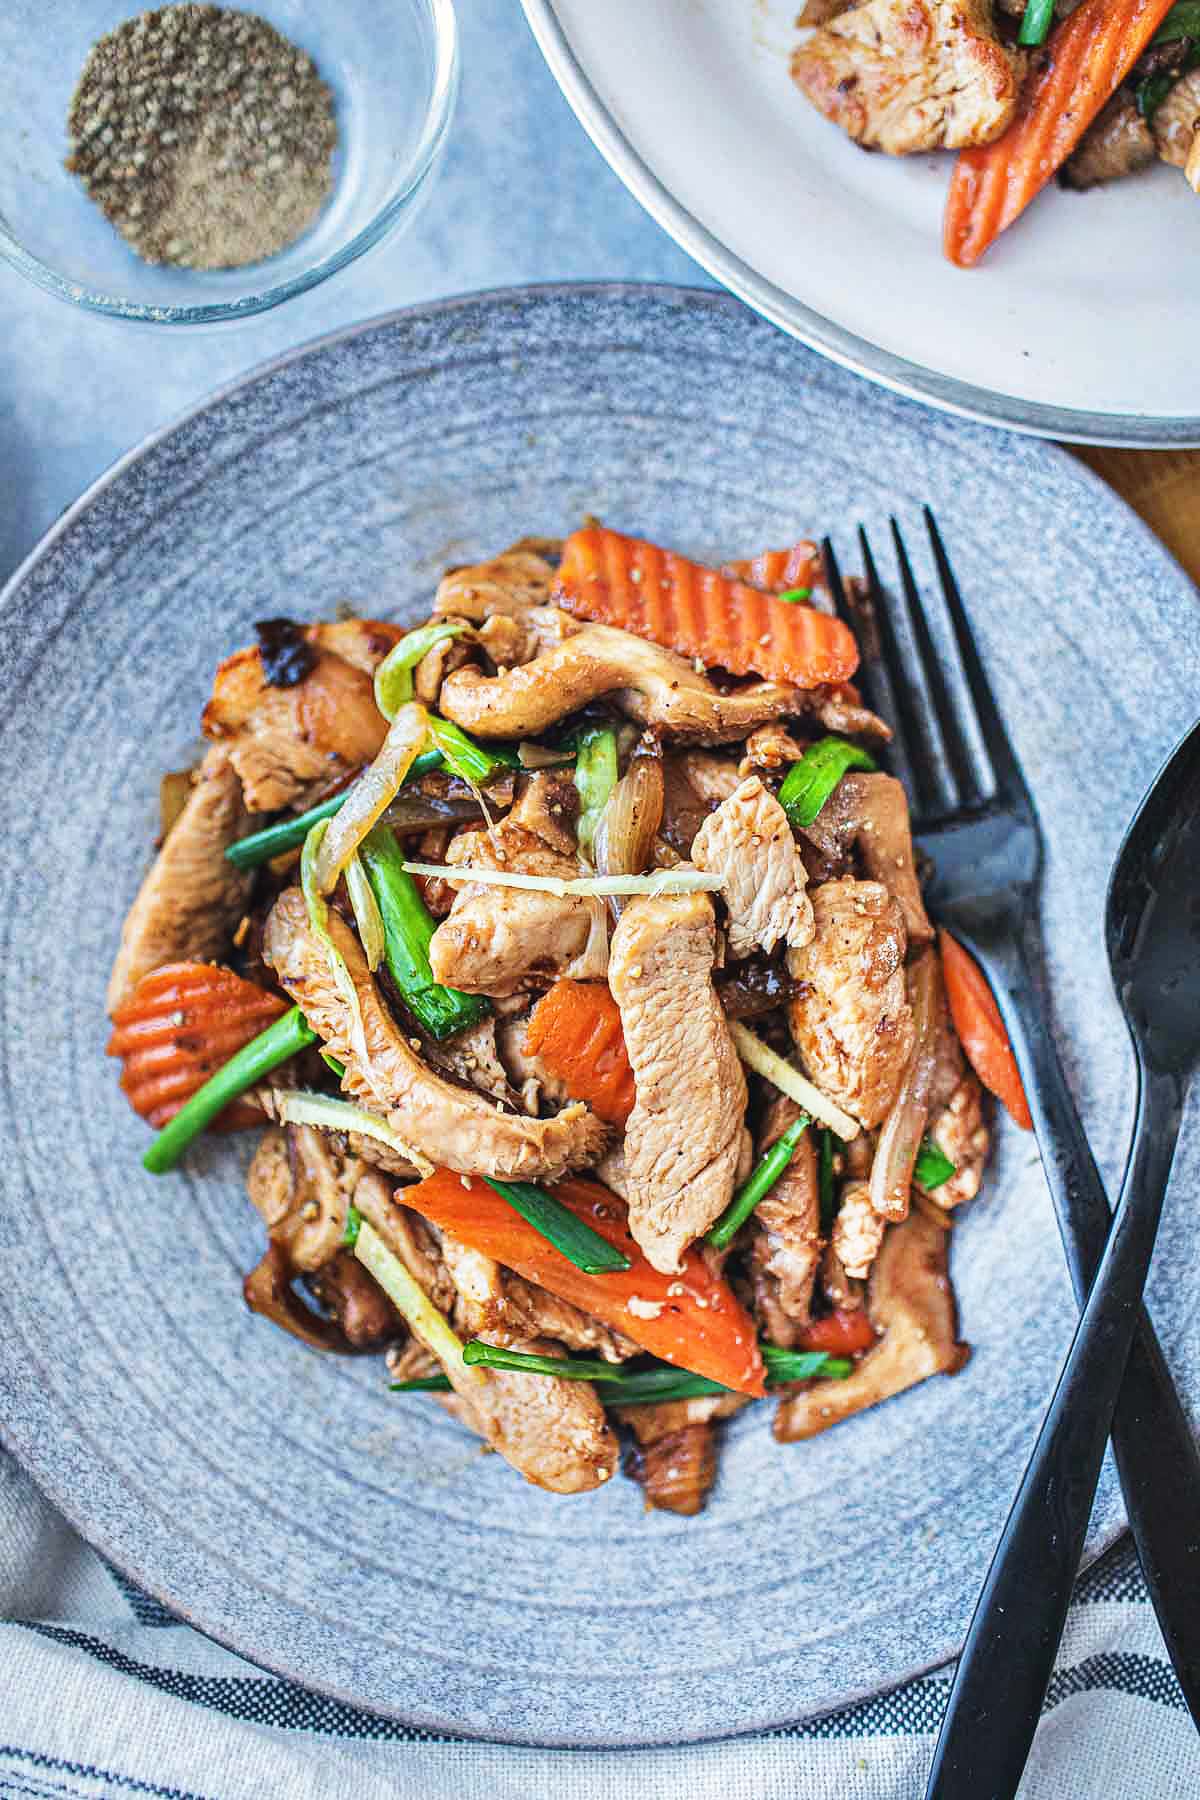 Thai ginger chicken on a plate with a fork and spoon.